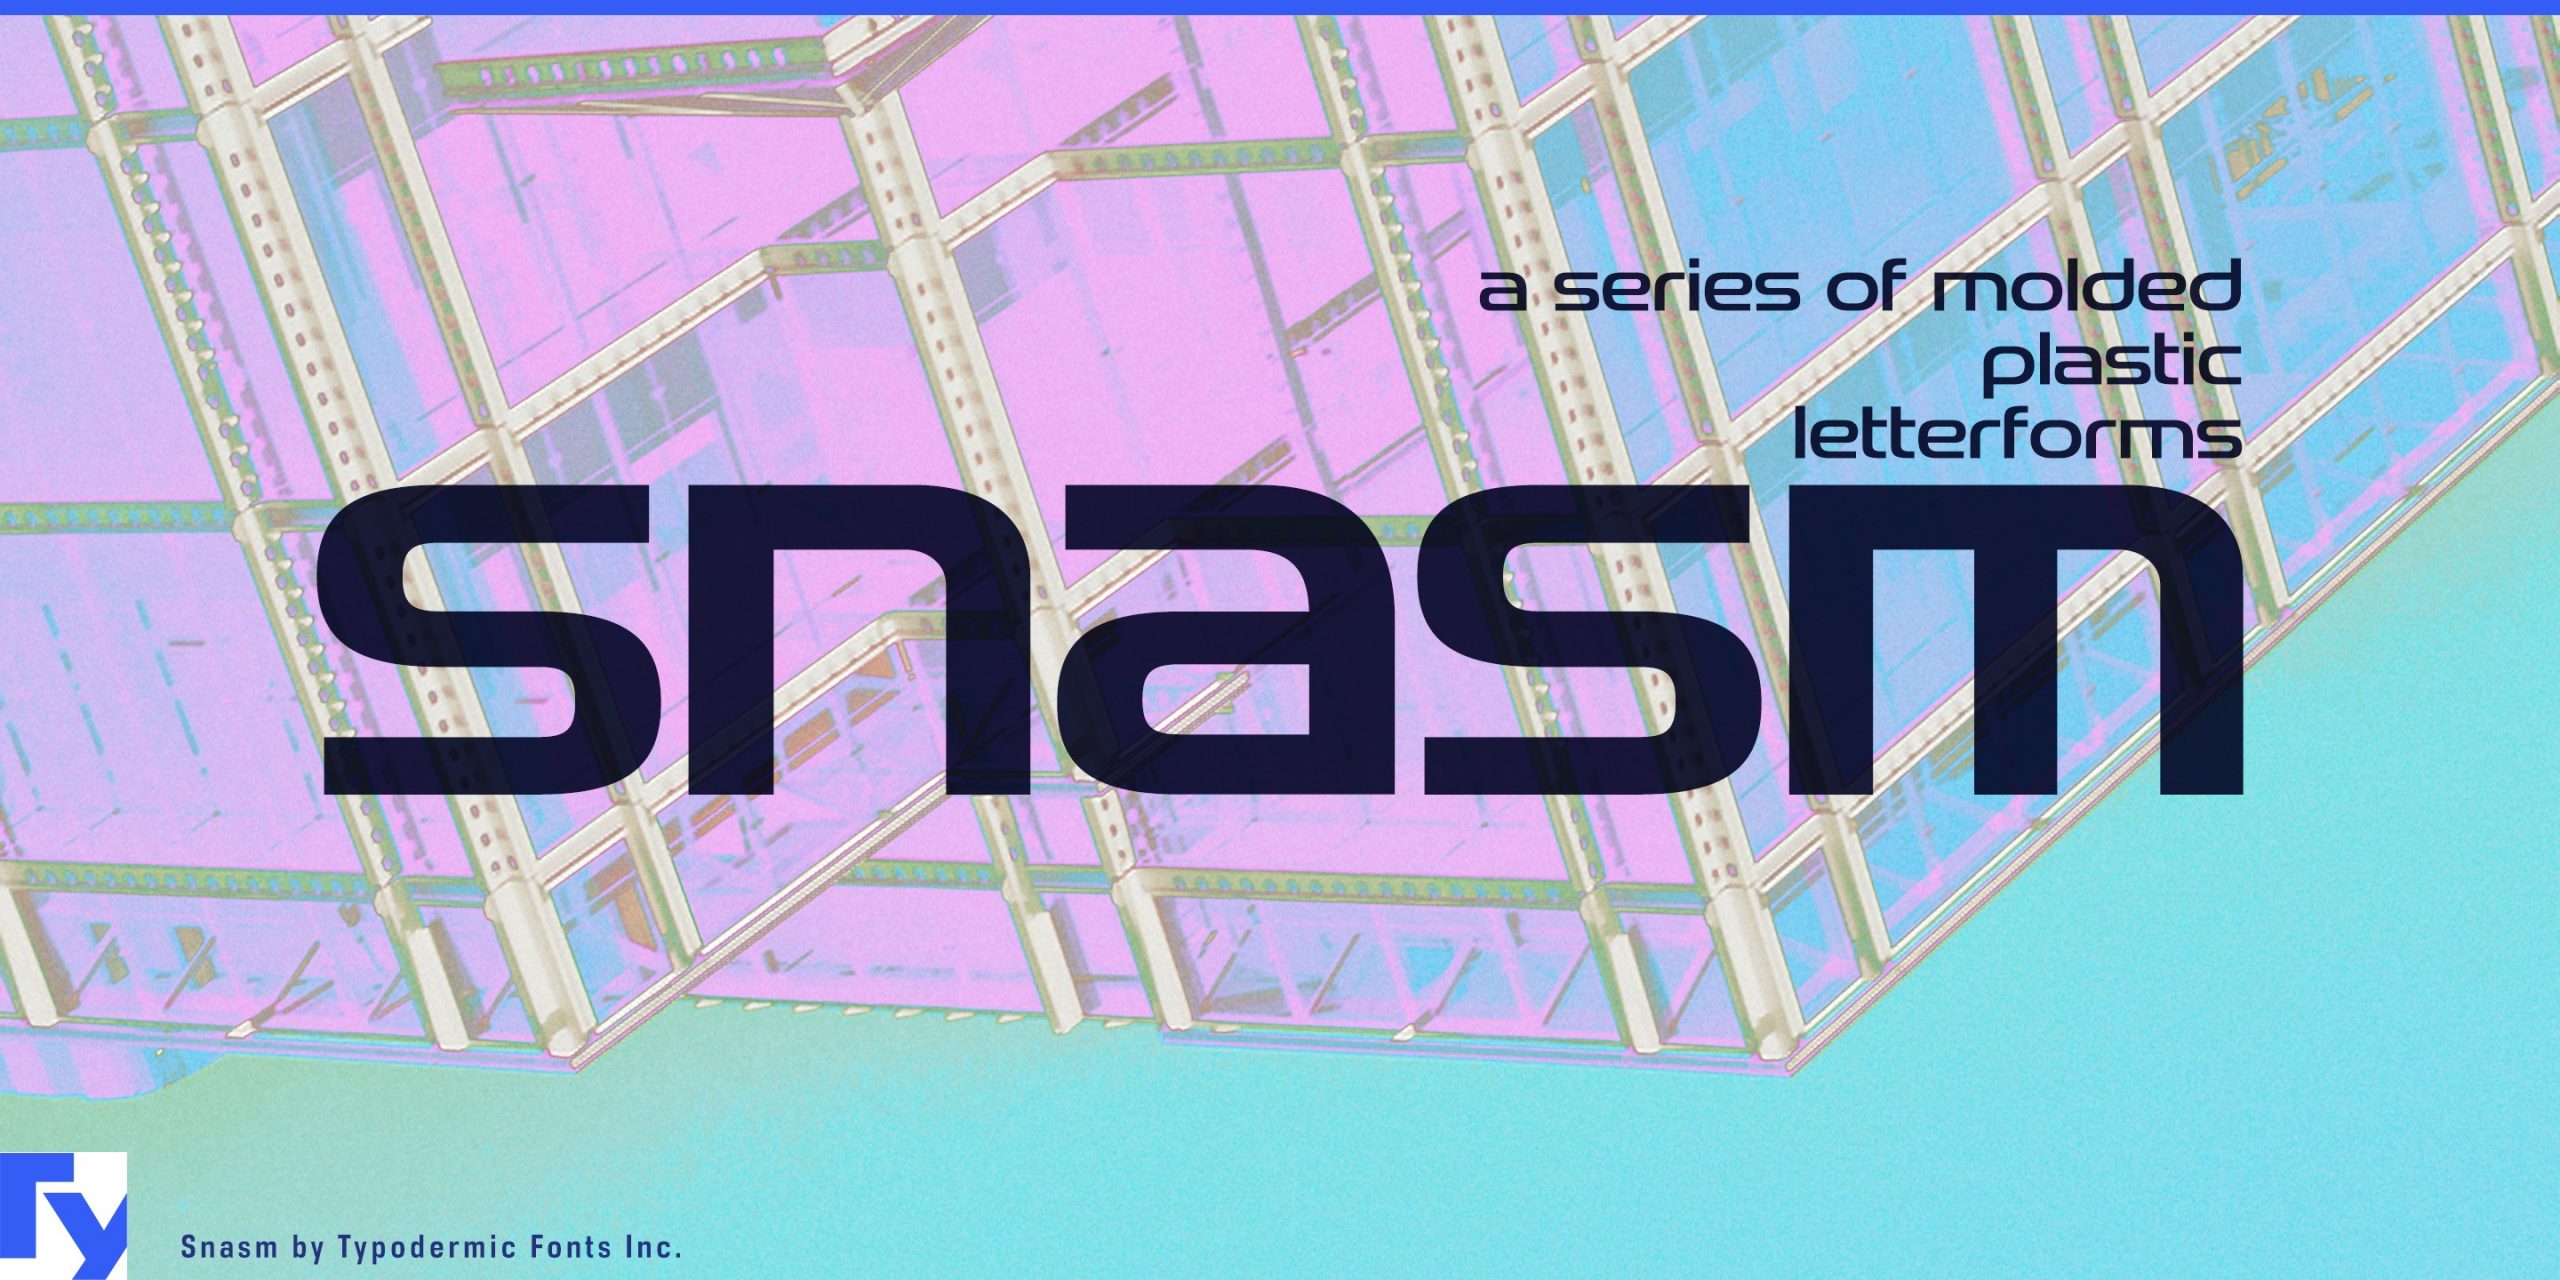 Dive into the high-tech design strategy of the late 20th century with Snasm.